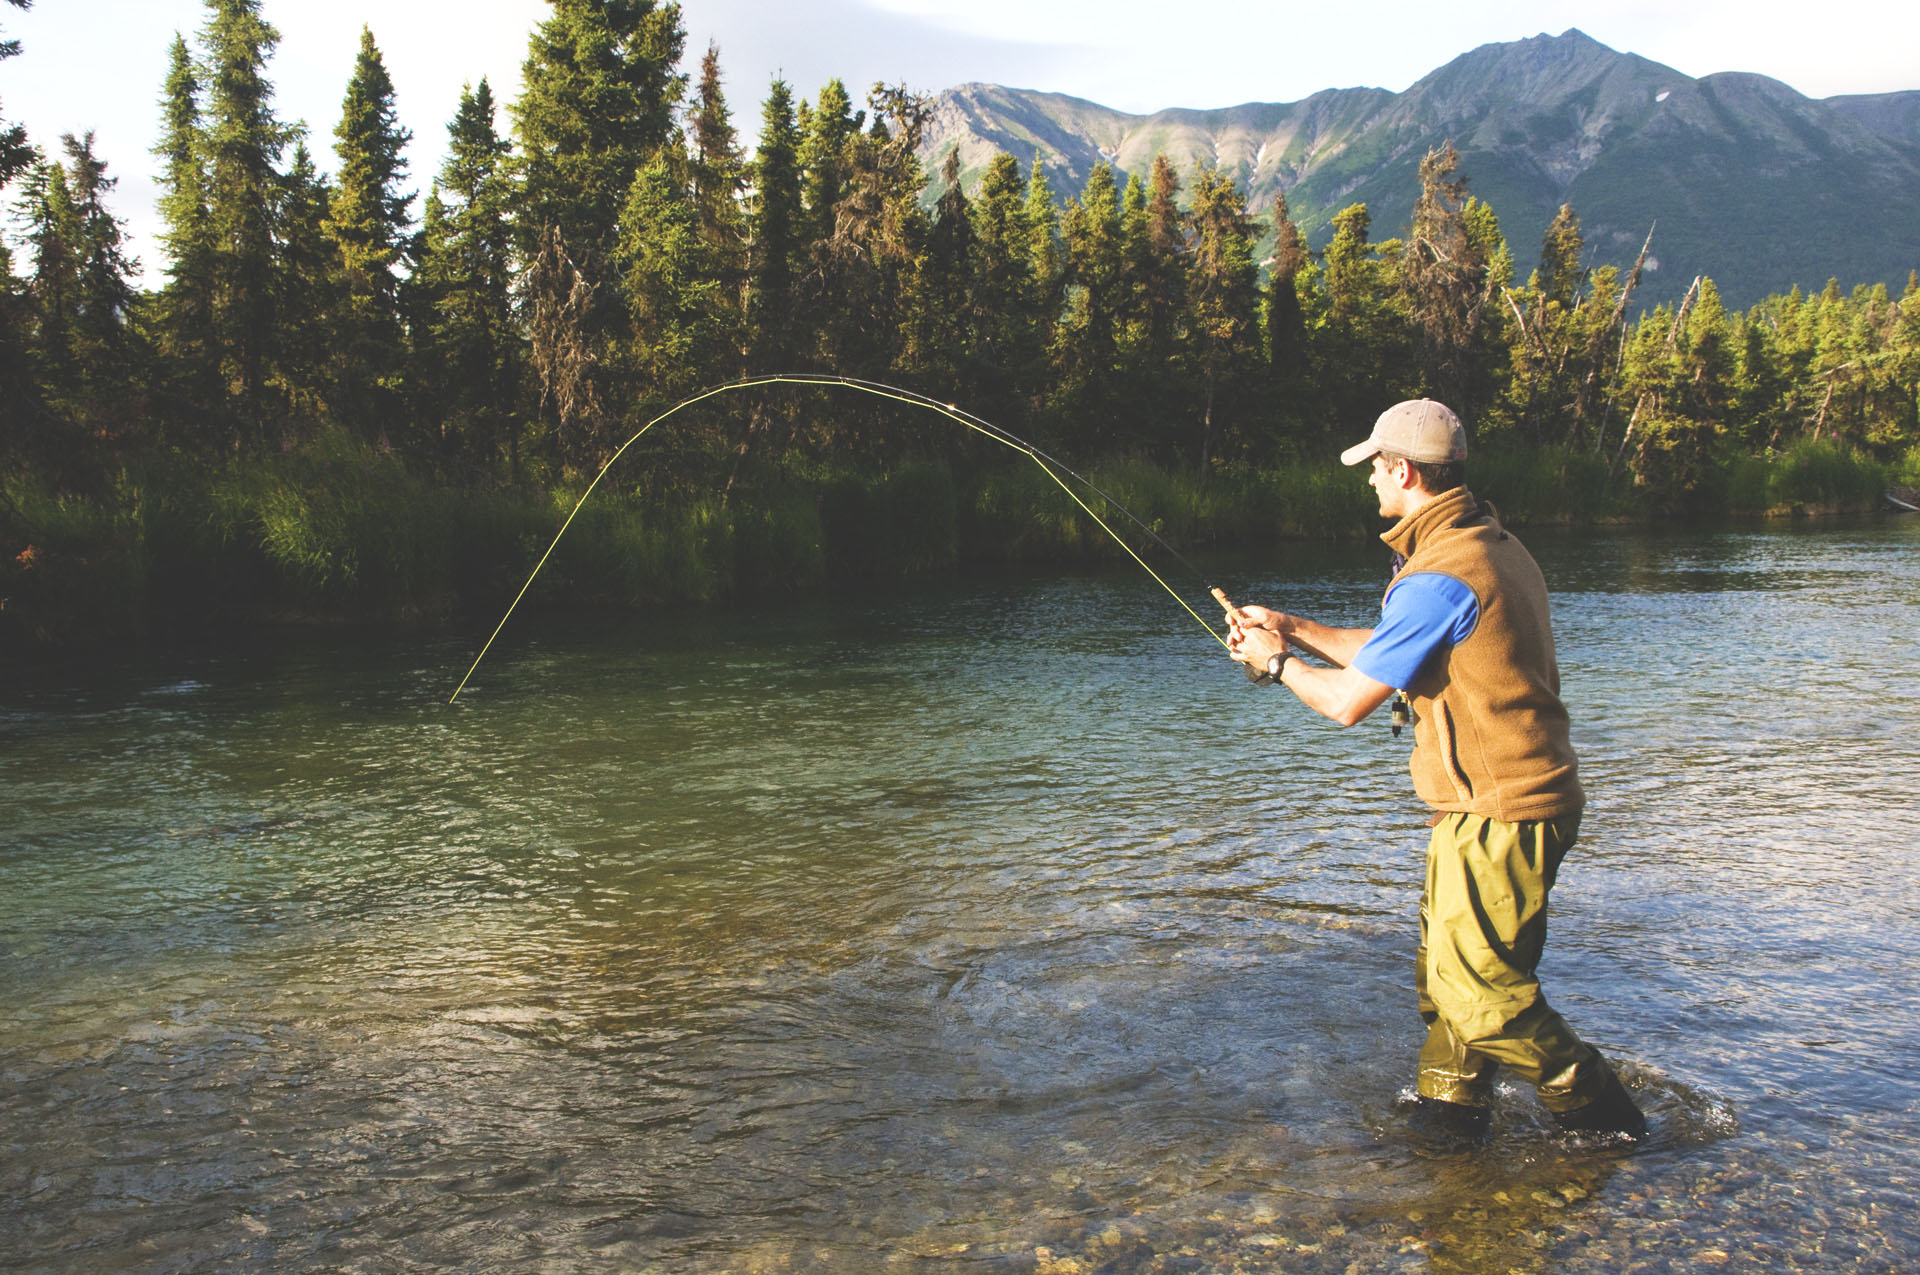 Want 'exotic'? Look north to Alaska for culture, adventure and lots of fishing.